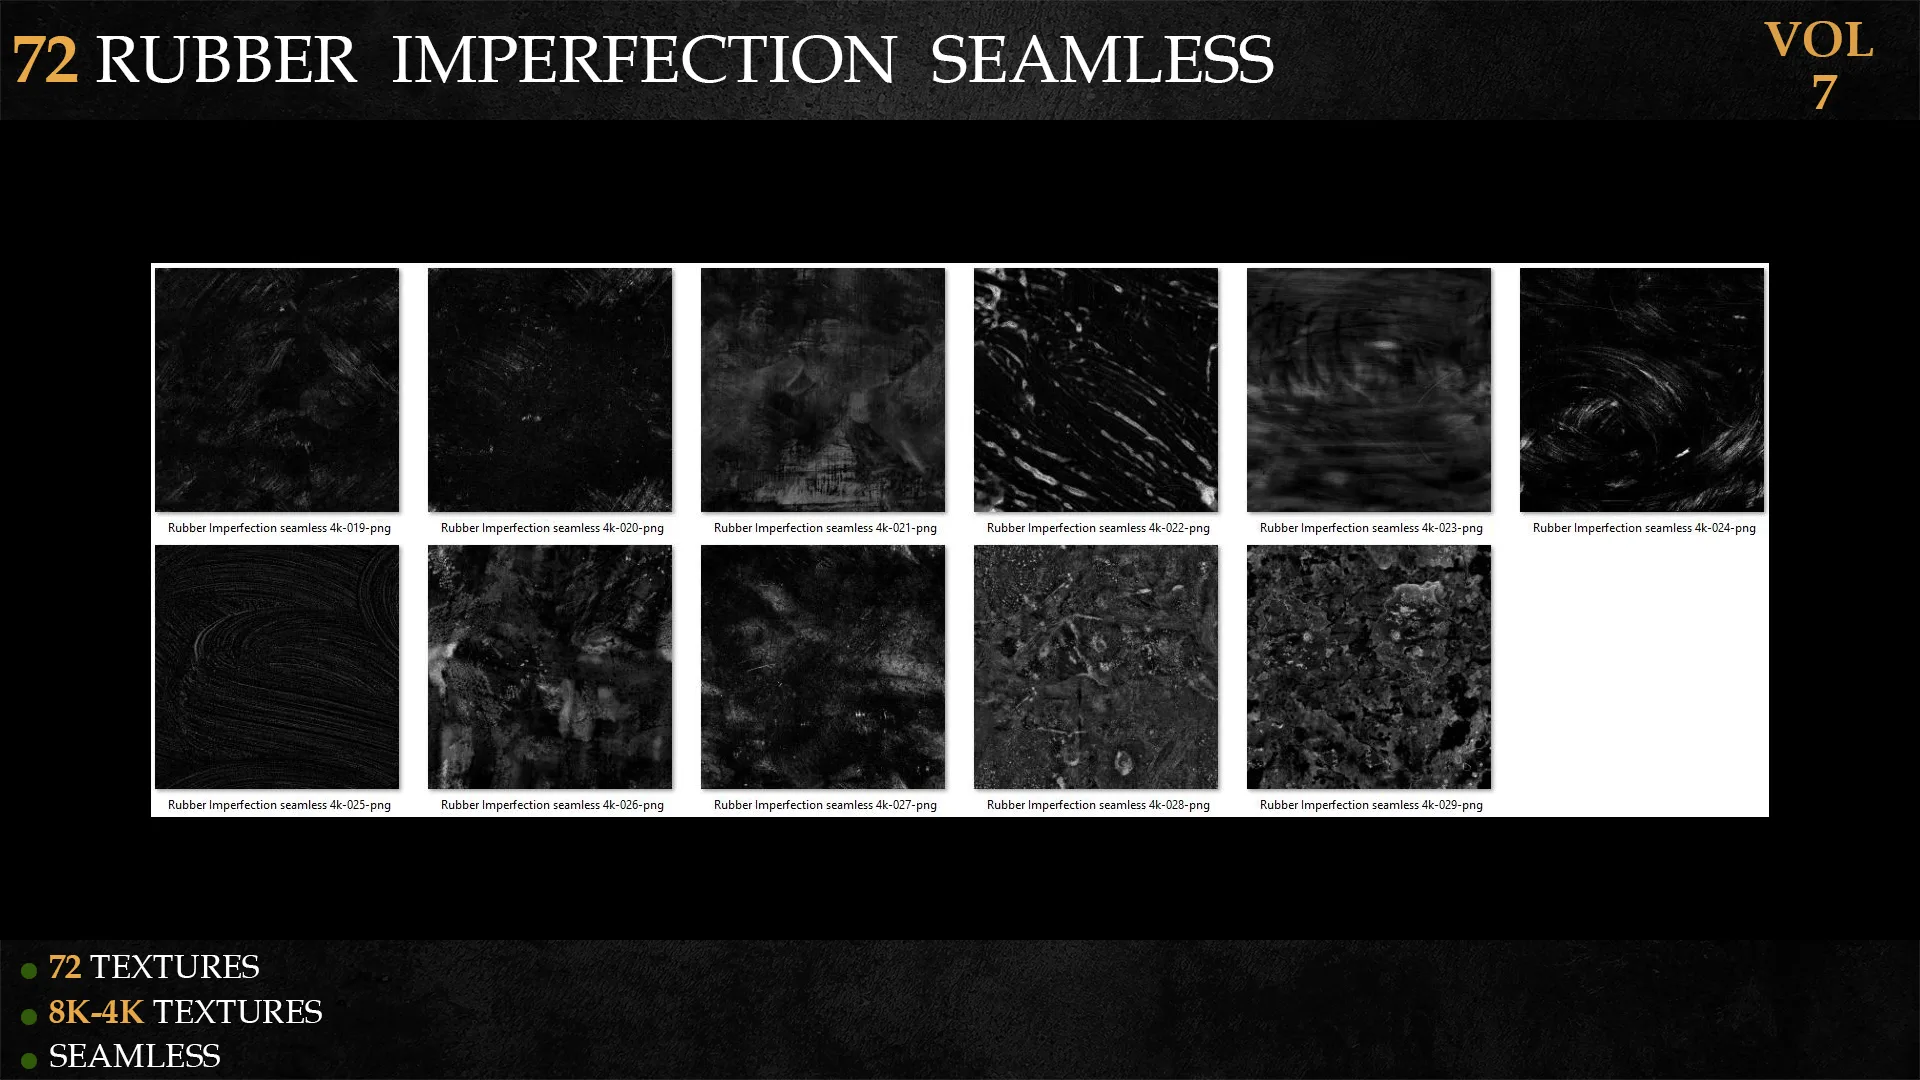 72 RUBBER IMPERFECTION SEAMLESS-VOL 7